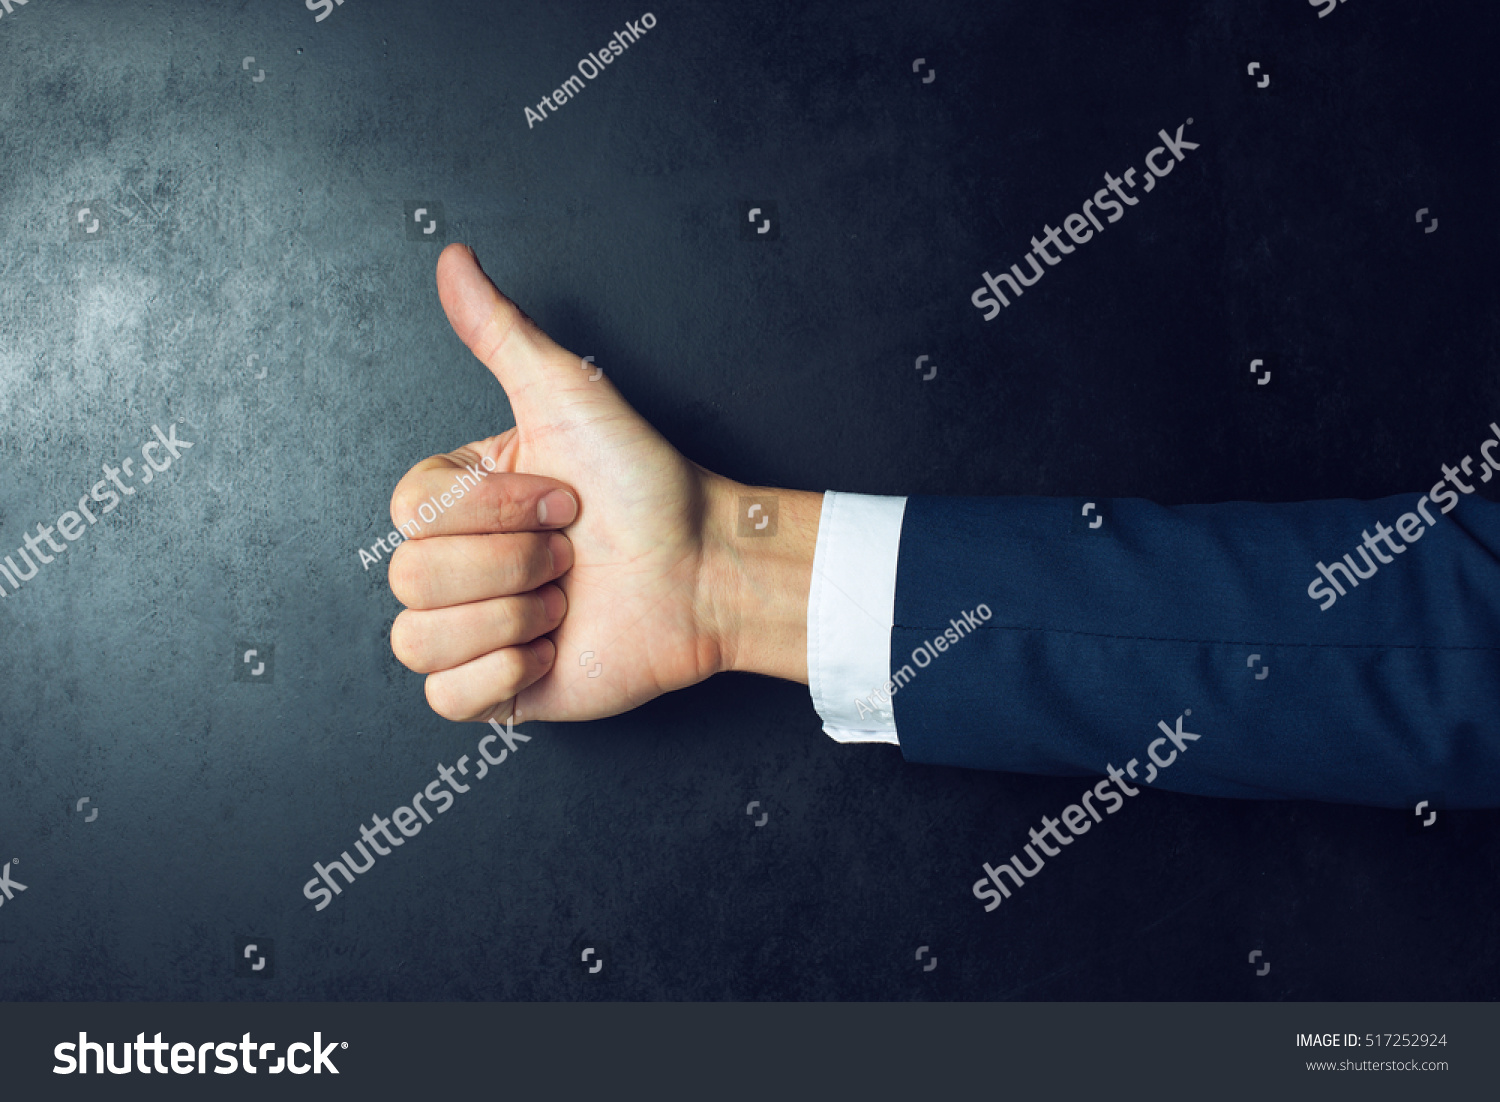 Like this. Close-up of human hand with thumb up in front of the blackboard #517252924